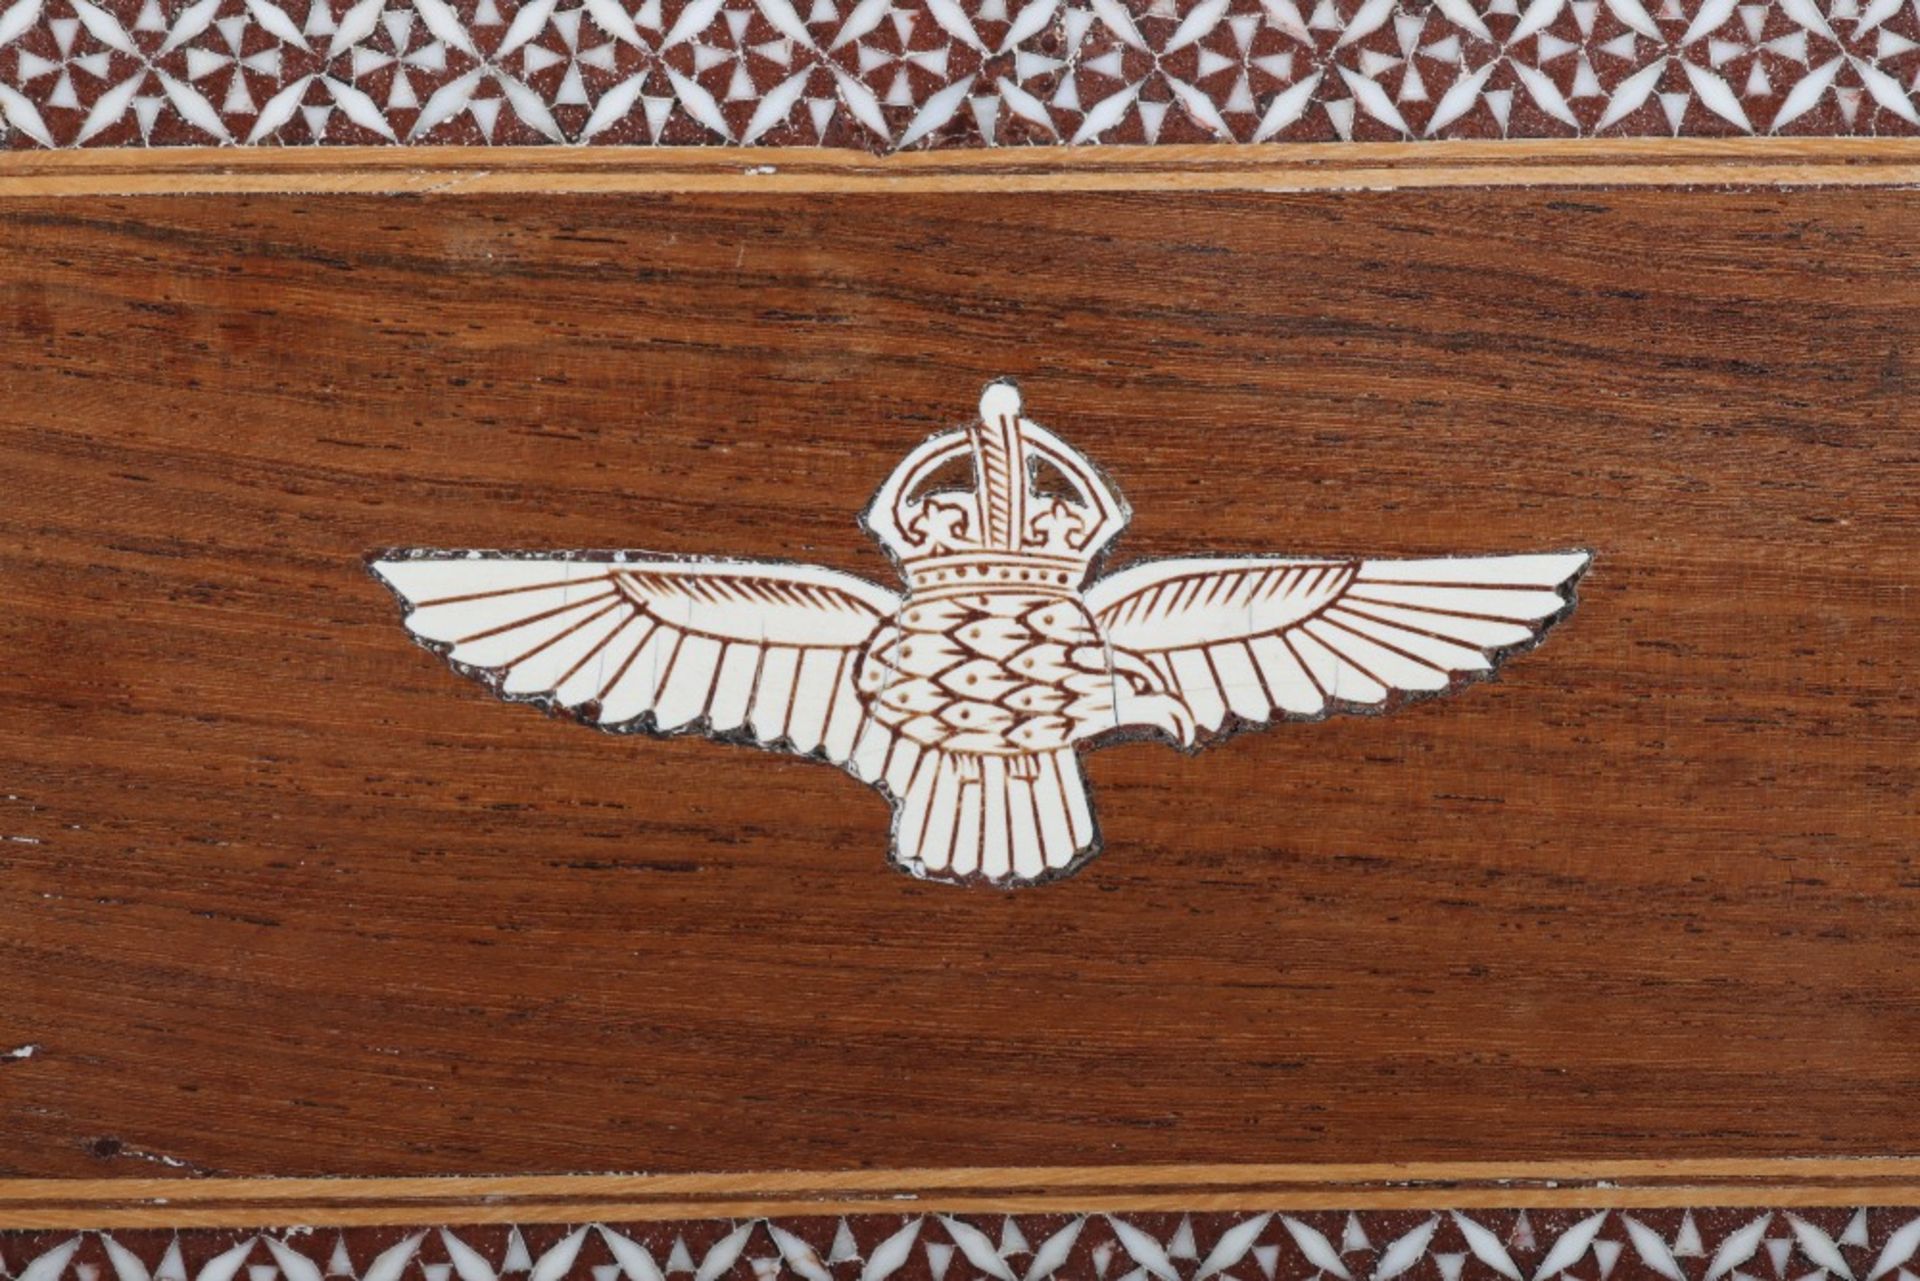 Fine Quality Indian Made Royal Air Force Music Box - Image 7 of 7